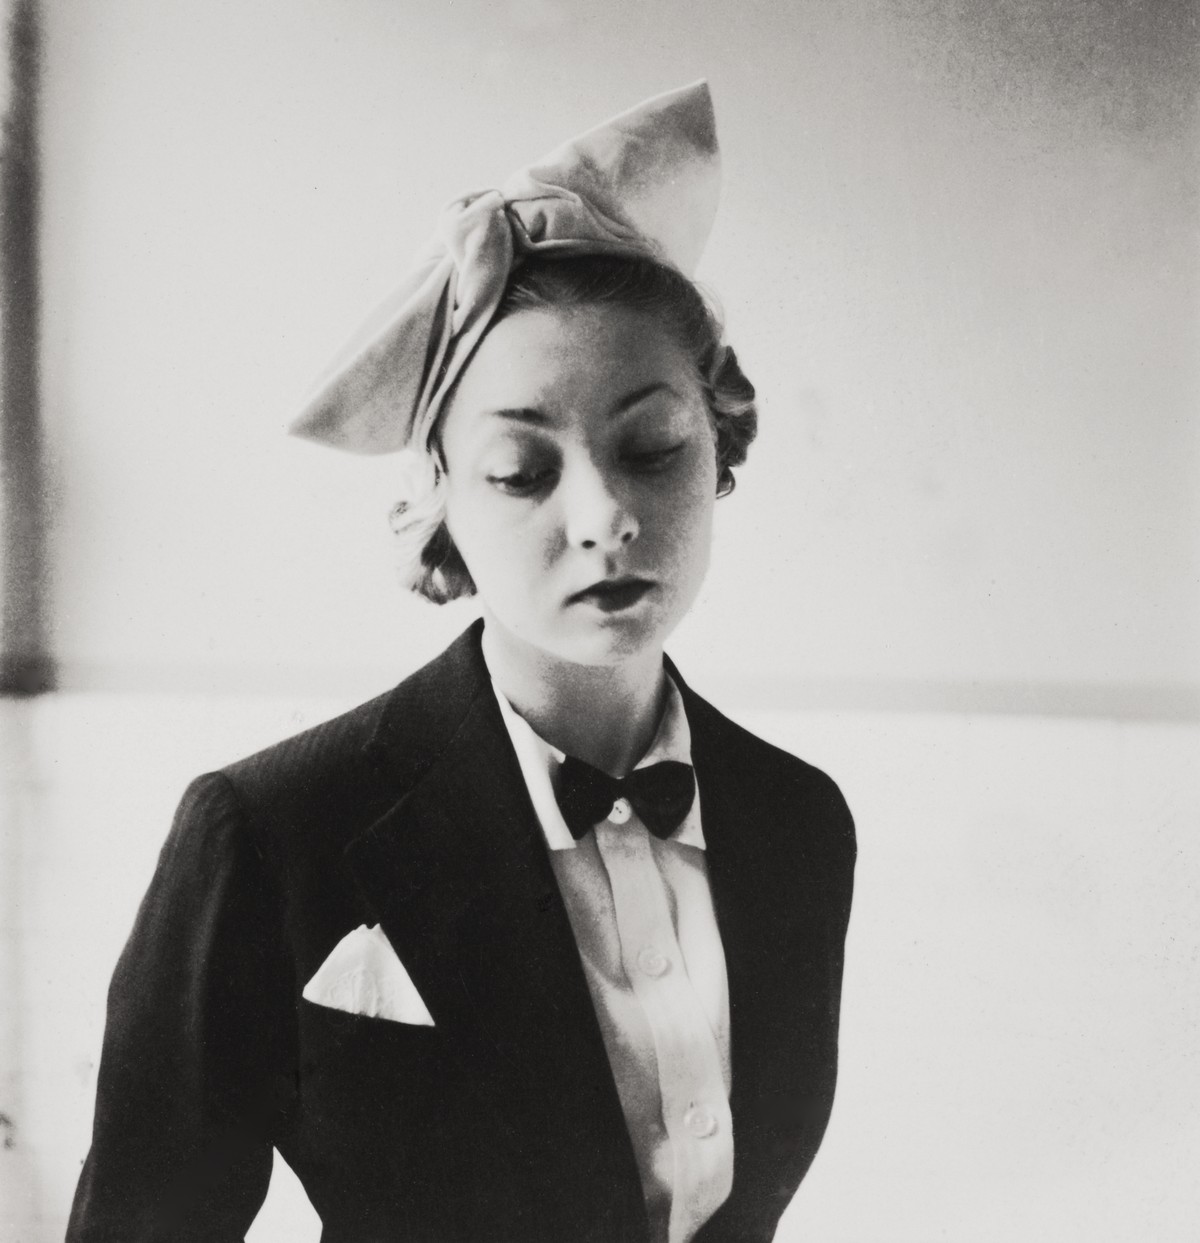 Baronova in a hat with jacket and bow tie